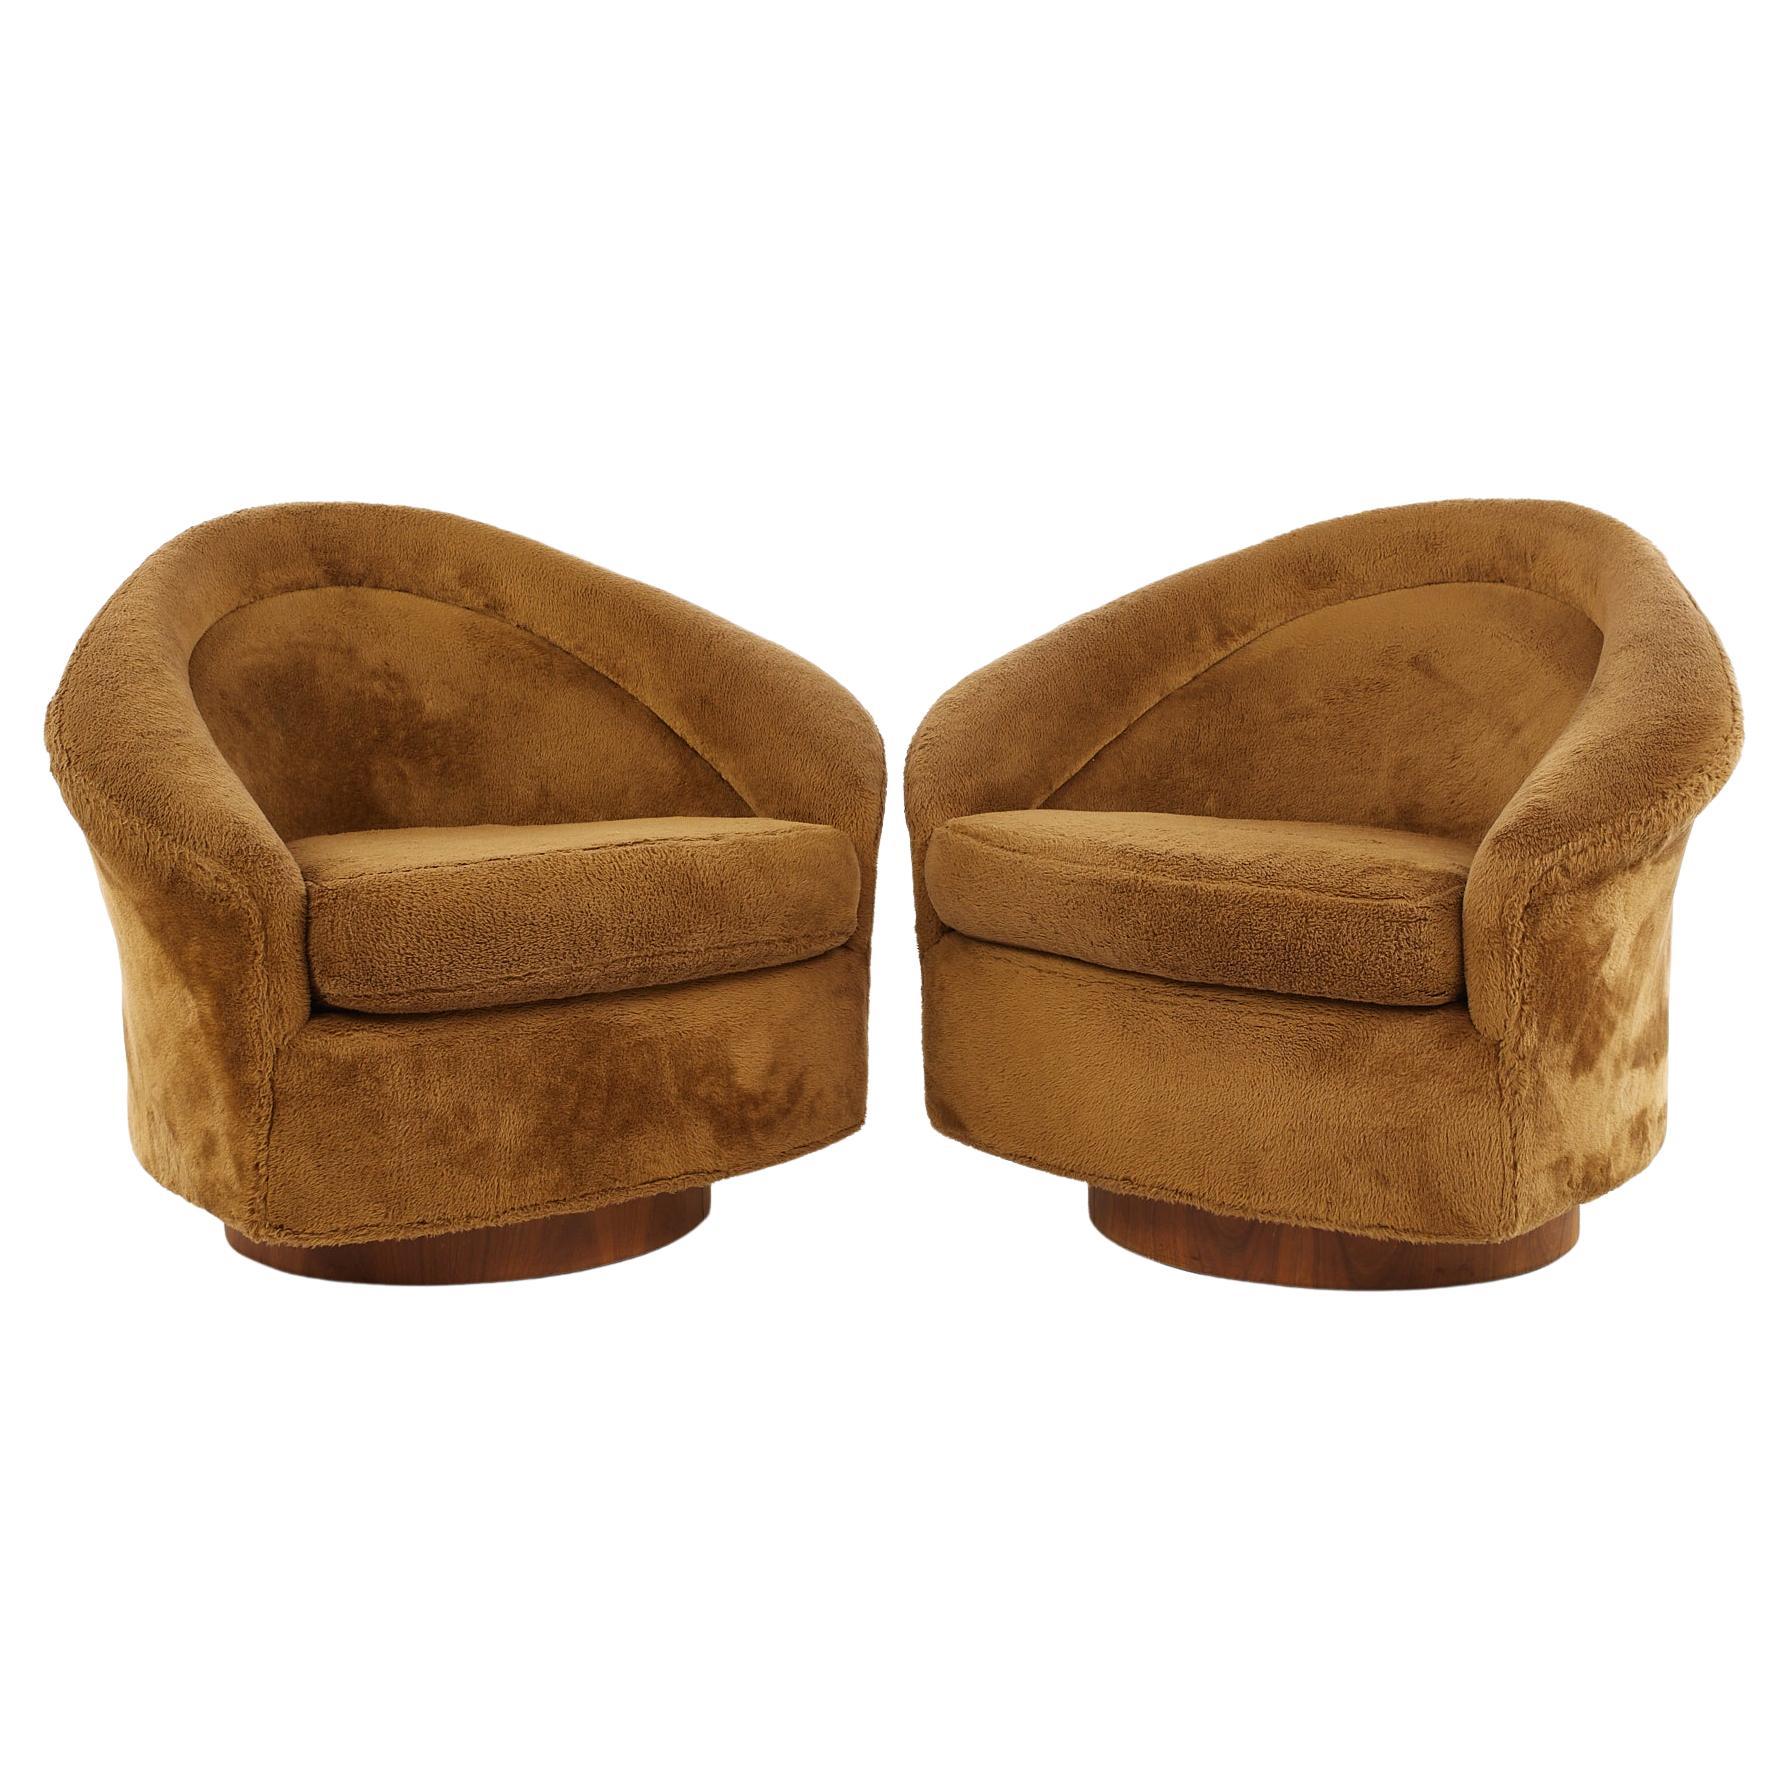 Adrian Pearsall for Craft Associates MCM Swivel Walnut Lounge Chairs, Pair